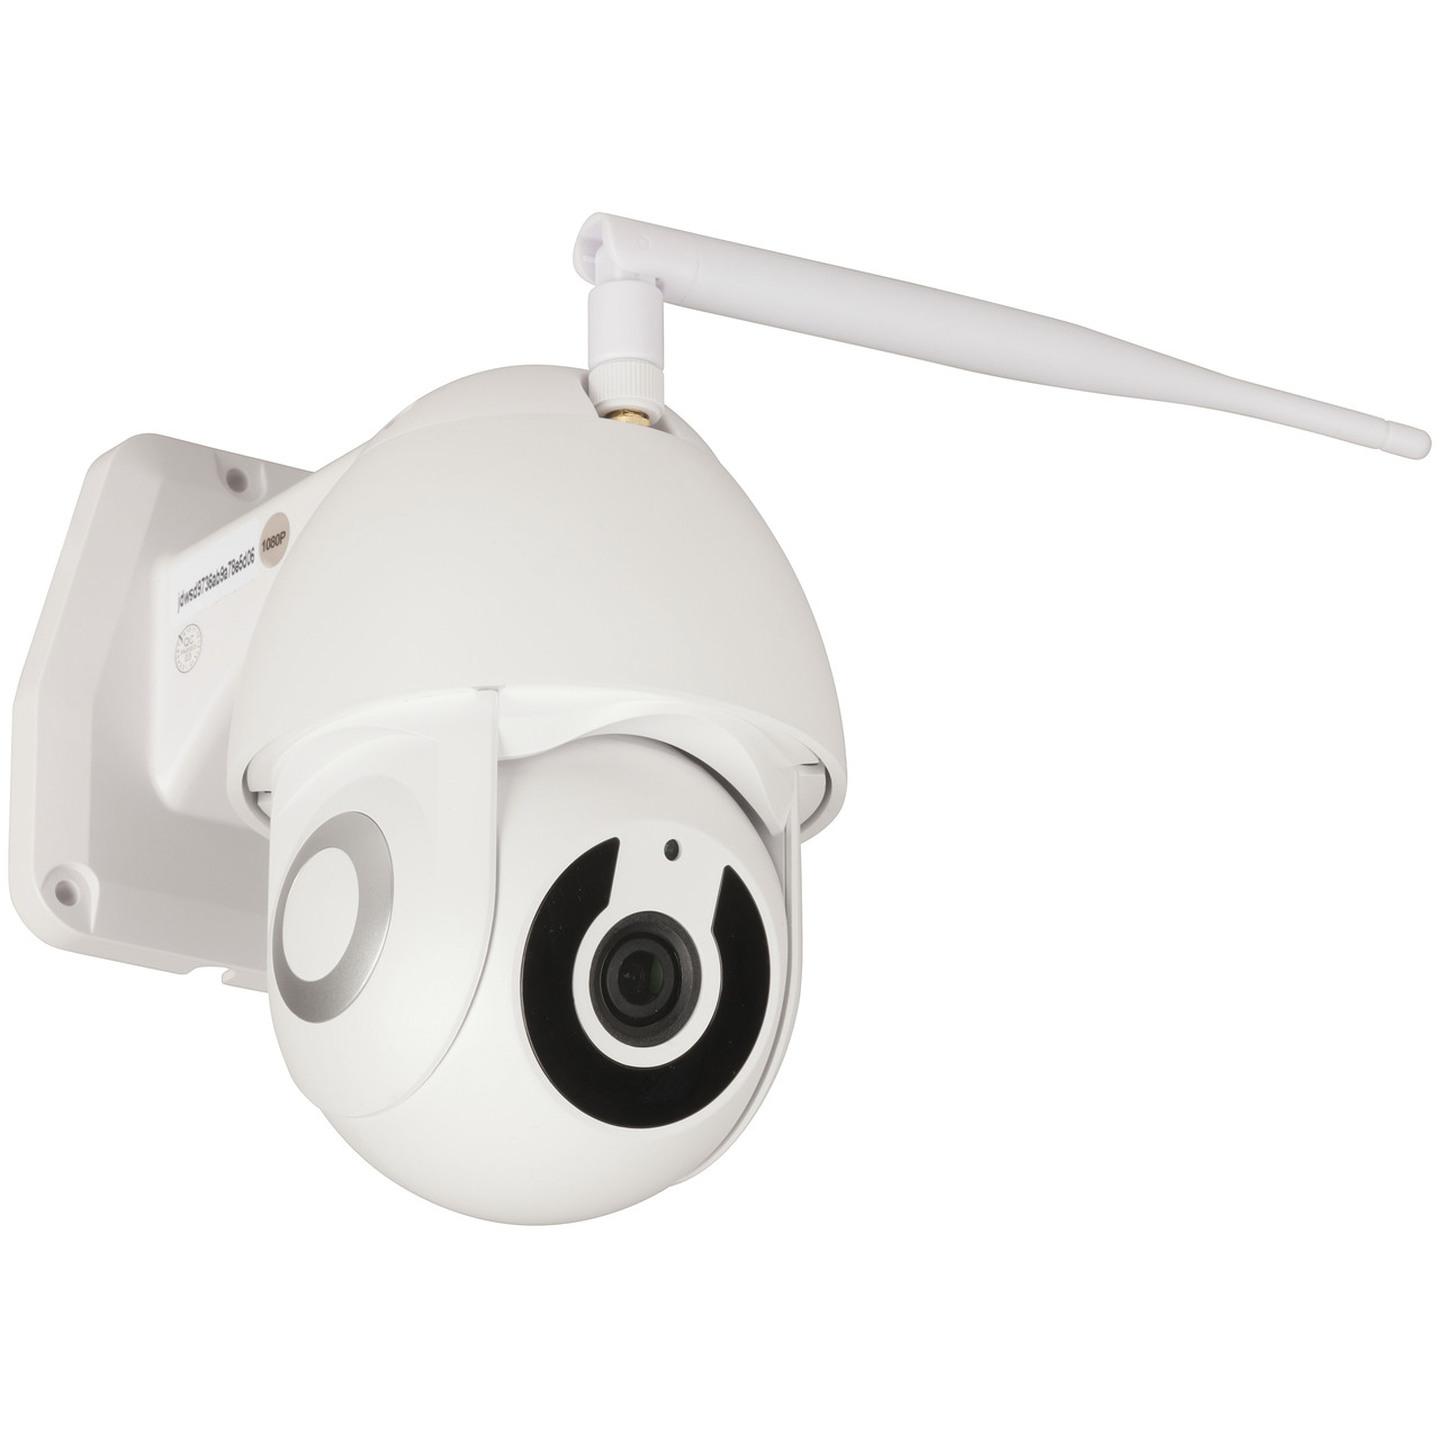 Outdoor Wireless Wi-Fi PTZ Camera with 2 Way Audio and Record